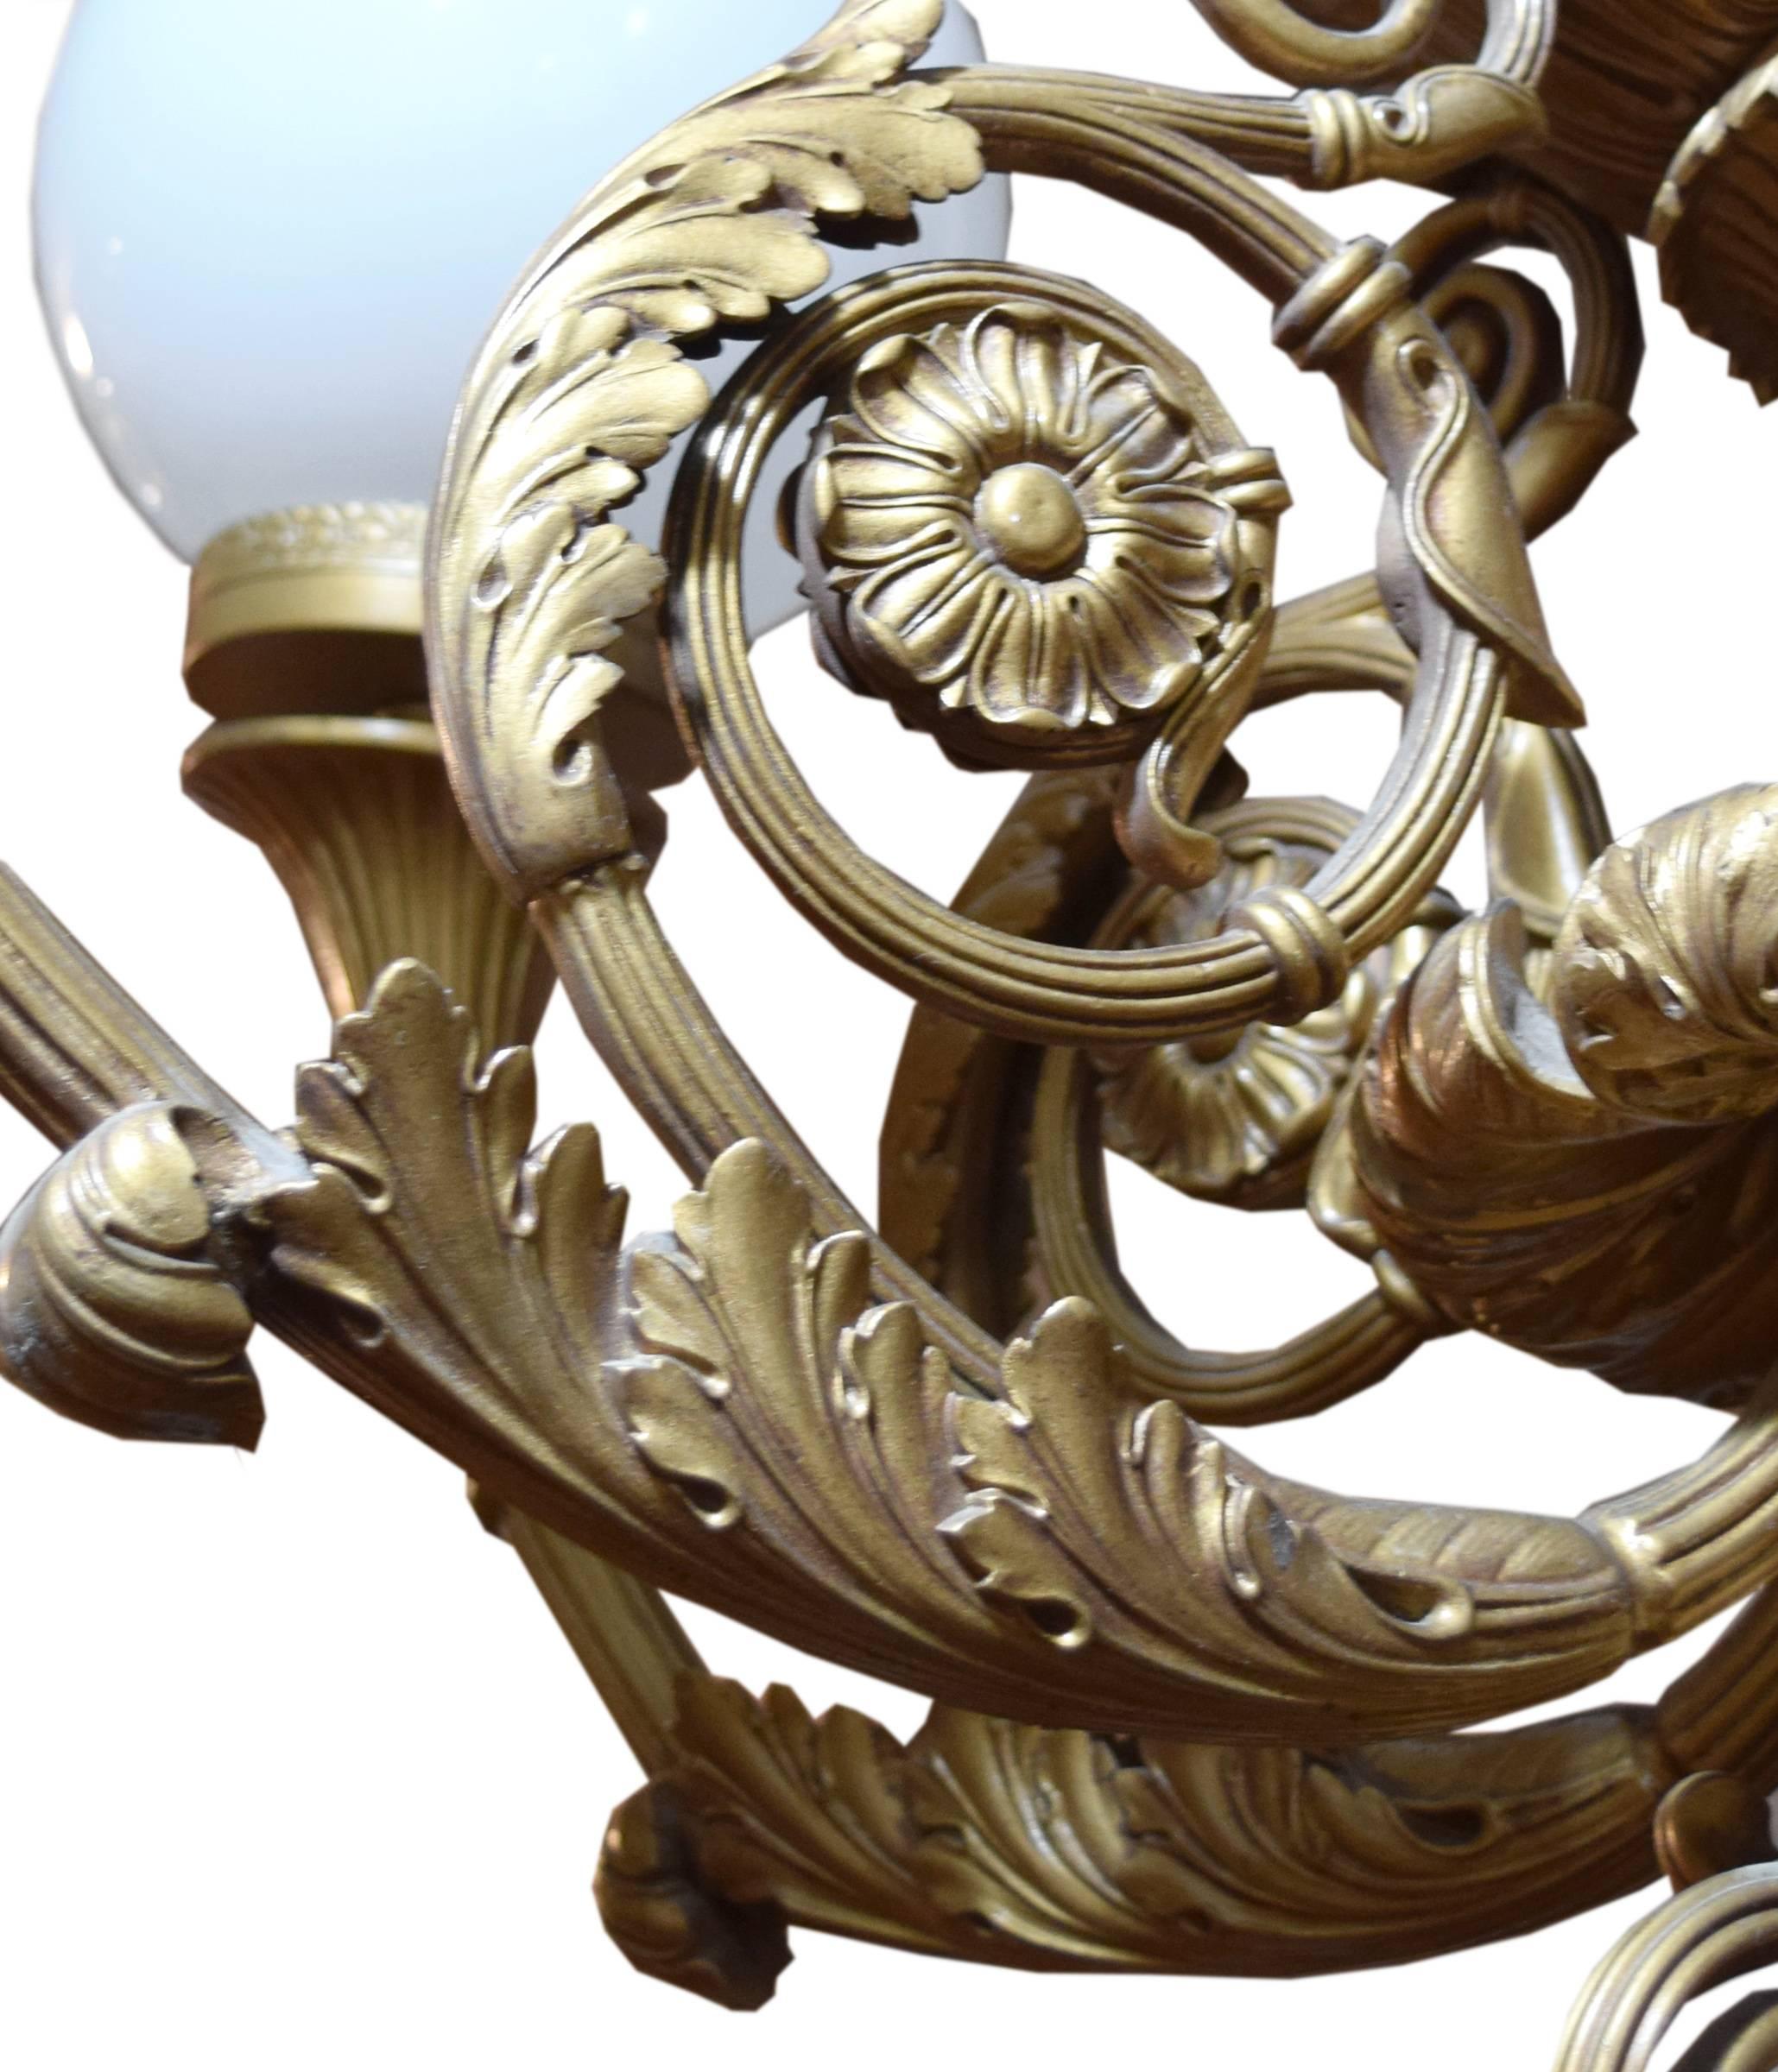 An American chandelier from the Marbro Theater, Chicago, Illinois having nine arms with glass shades, and scrolling acanthus leaf and floral motif. This chandelier hung in Chicago’s Water Tower visitor’s center after the Marbro Theater was razed in